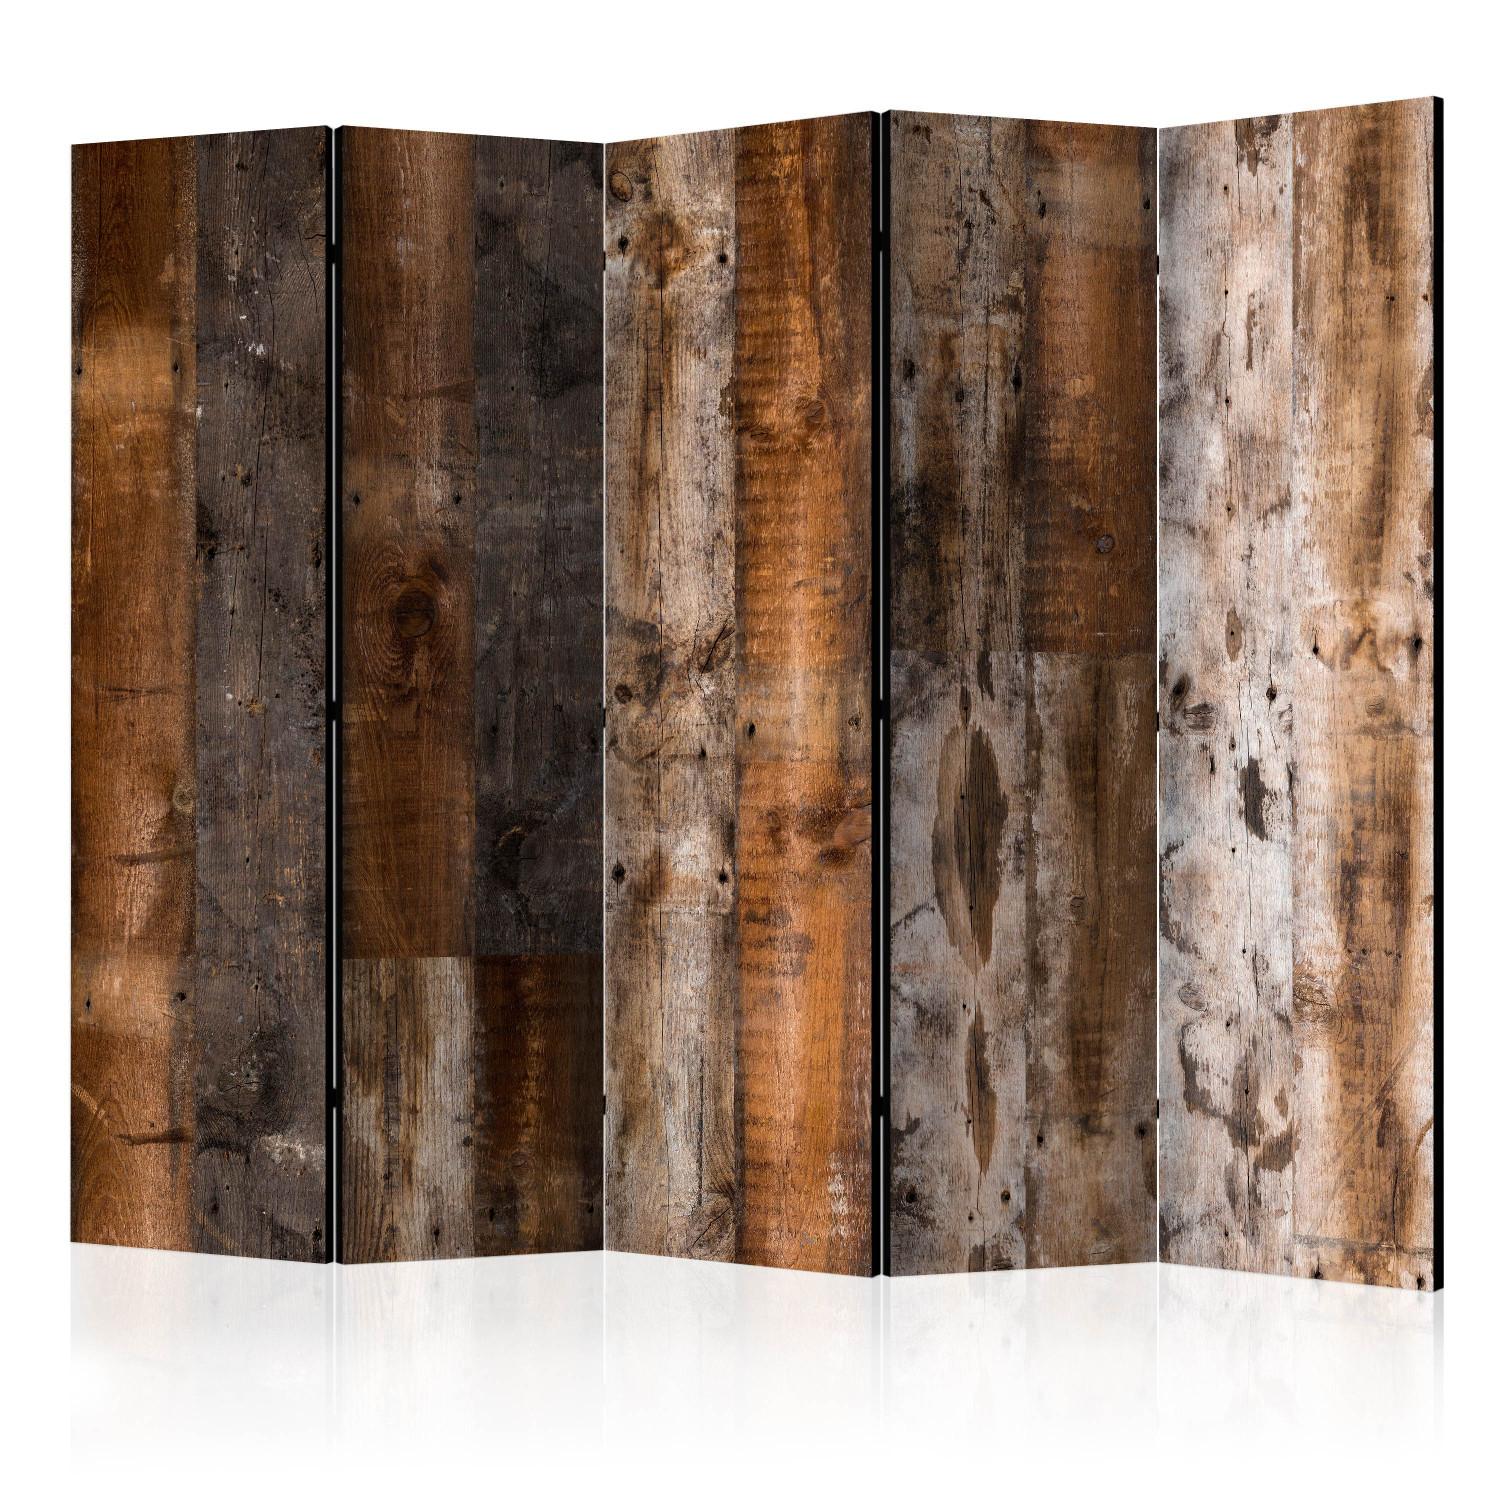 Room Divider Antique Wood II - texture of wooden planks with subtle knots